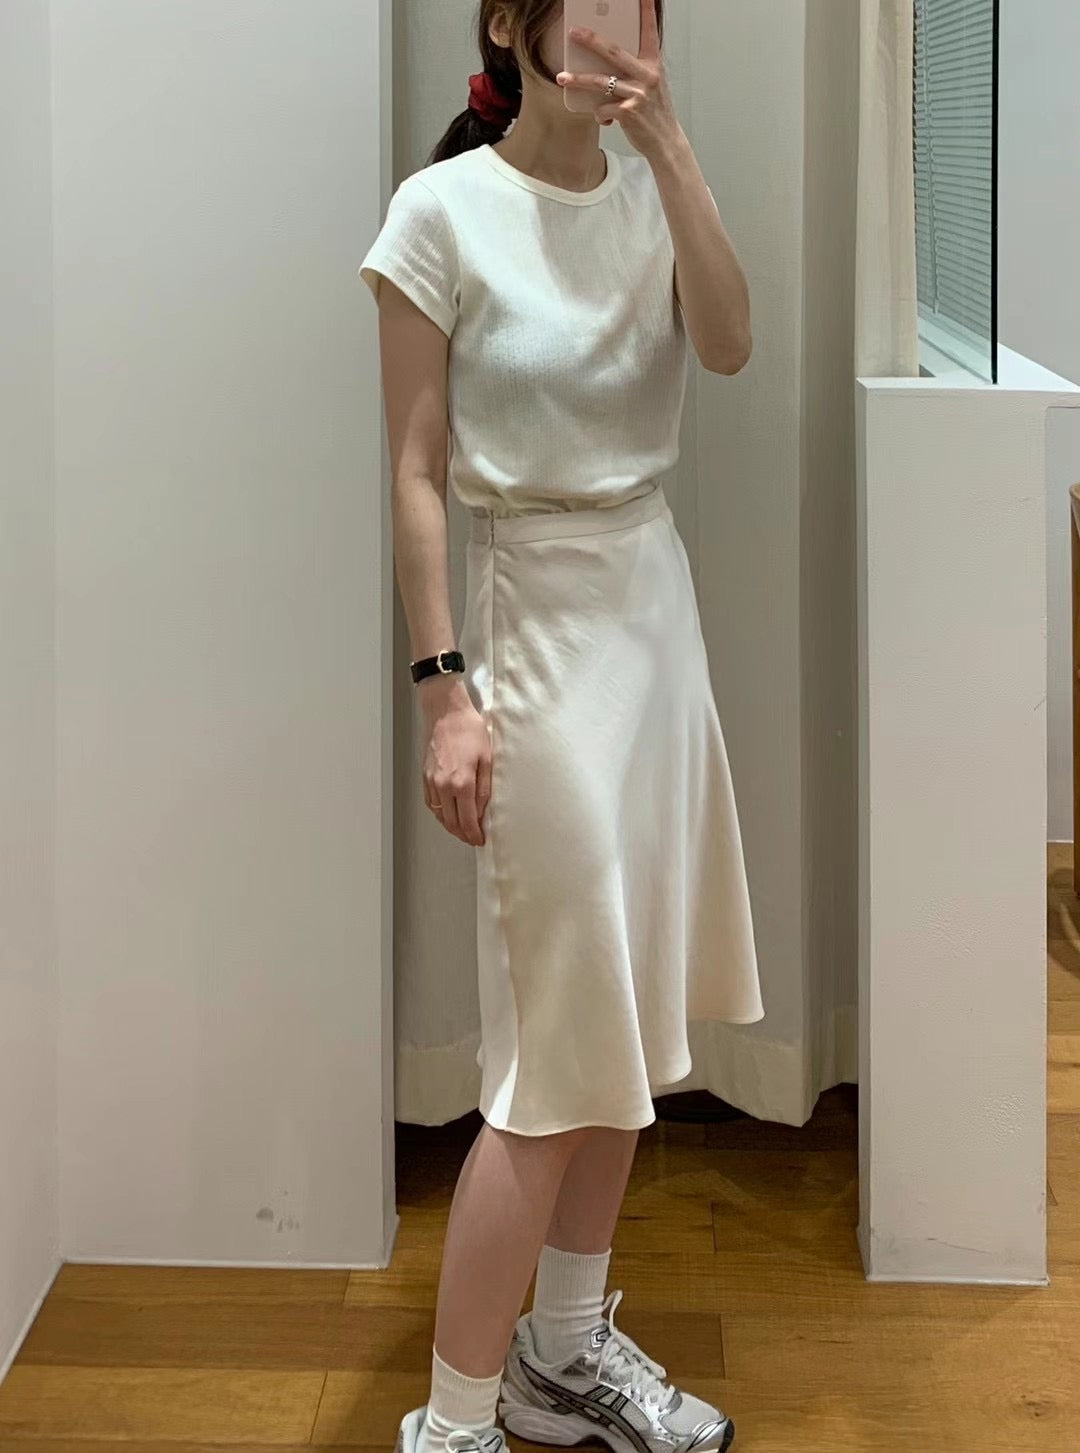 SS08 - Carrie Satin Skirt (highly recommend!)